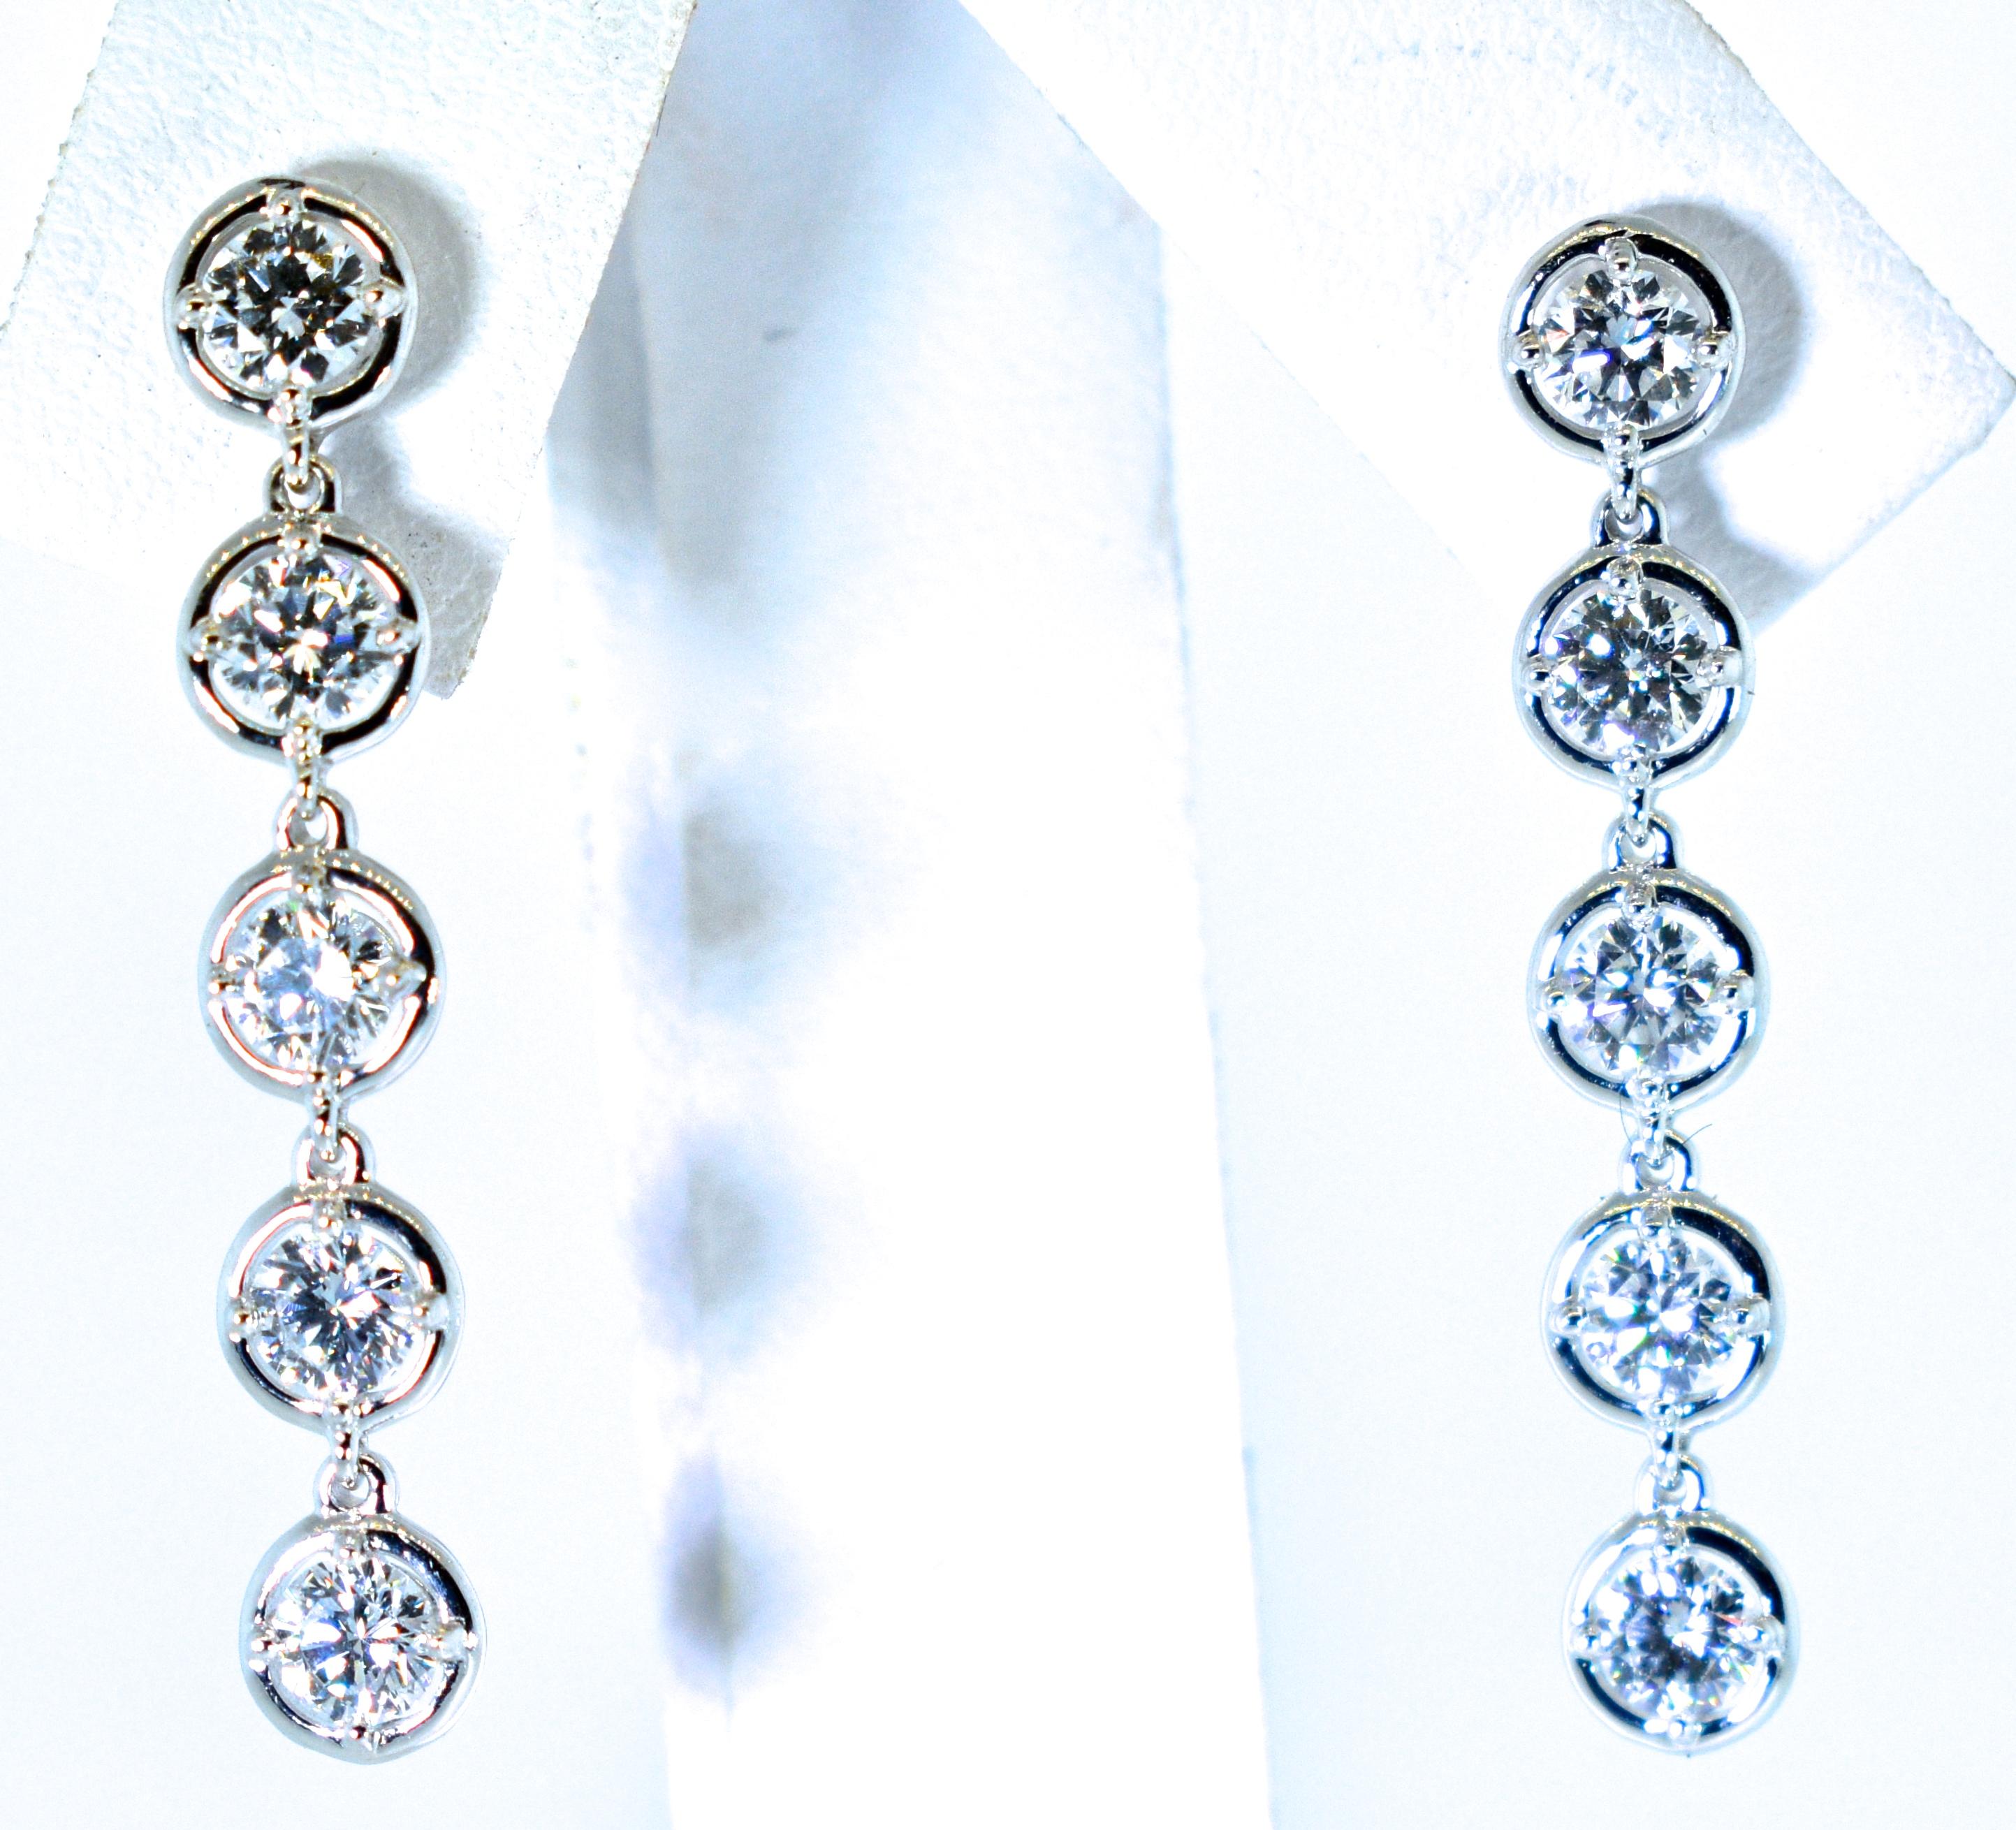 Van Cleef & Arpels diamond drop earrings with 10 diamonds all well cut and well matched, approximately colorless (F), and very very slightly included (VVS) quality.  The total diamond is estimated to be 2.2 cts.  These 1.25 inch long well made